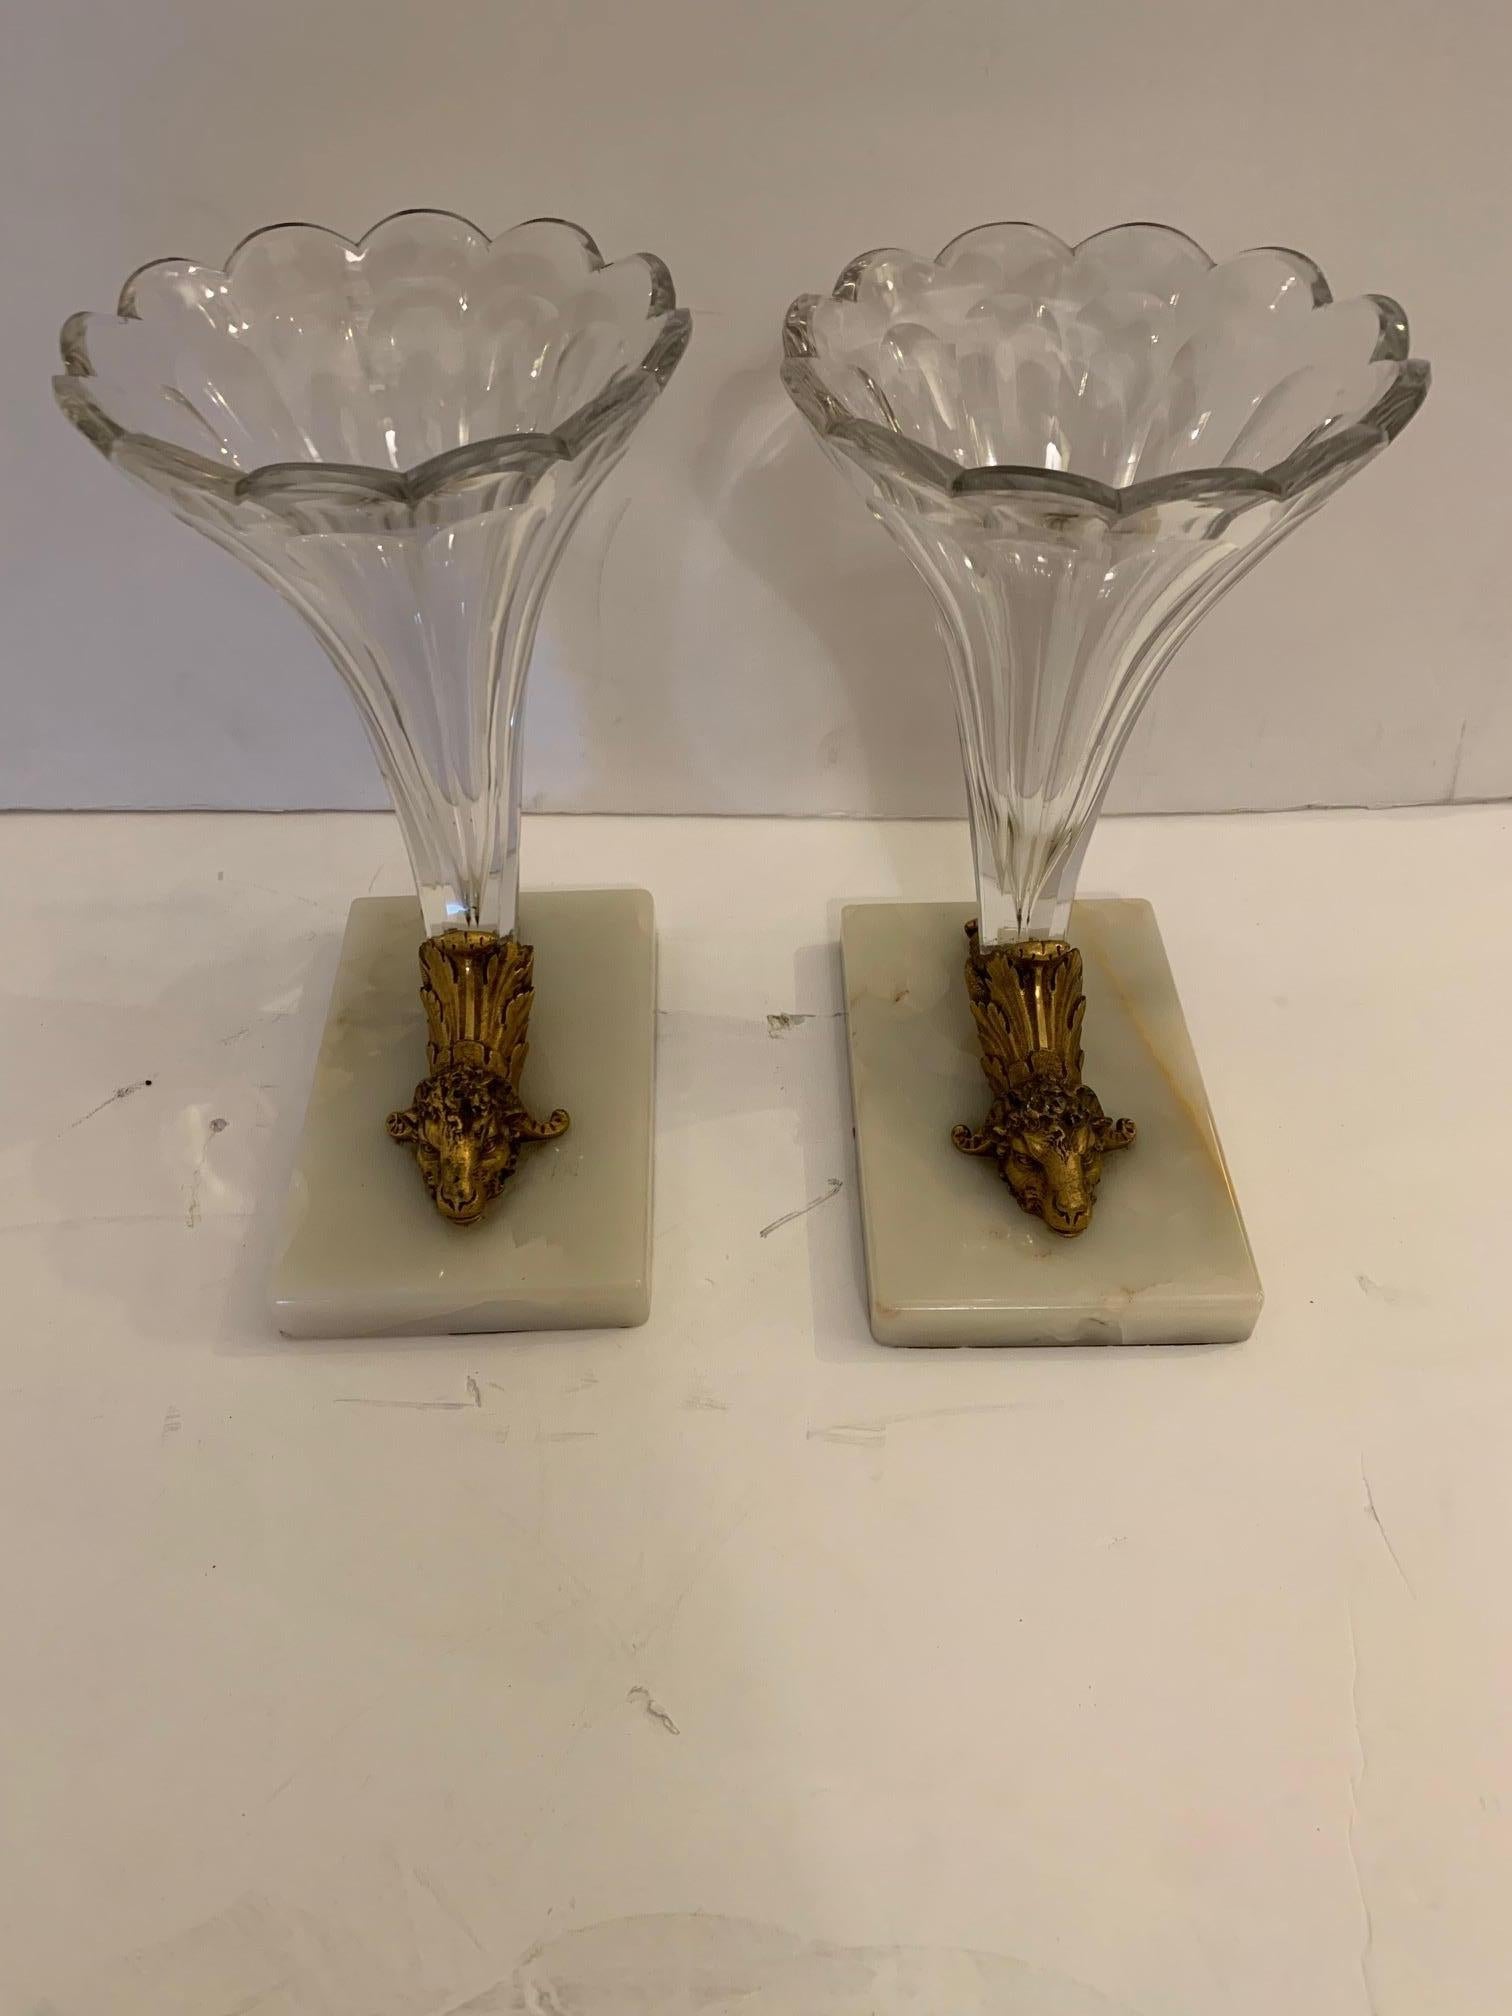 A beautiful pair of cut glass cornucopia or garniture having white marble bases and stunning bronze decorative rams heads.